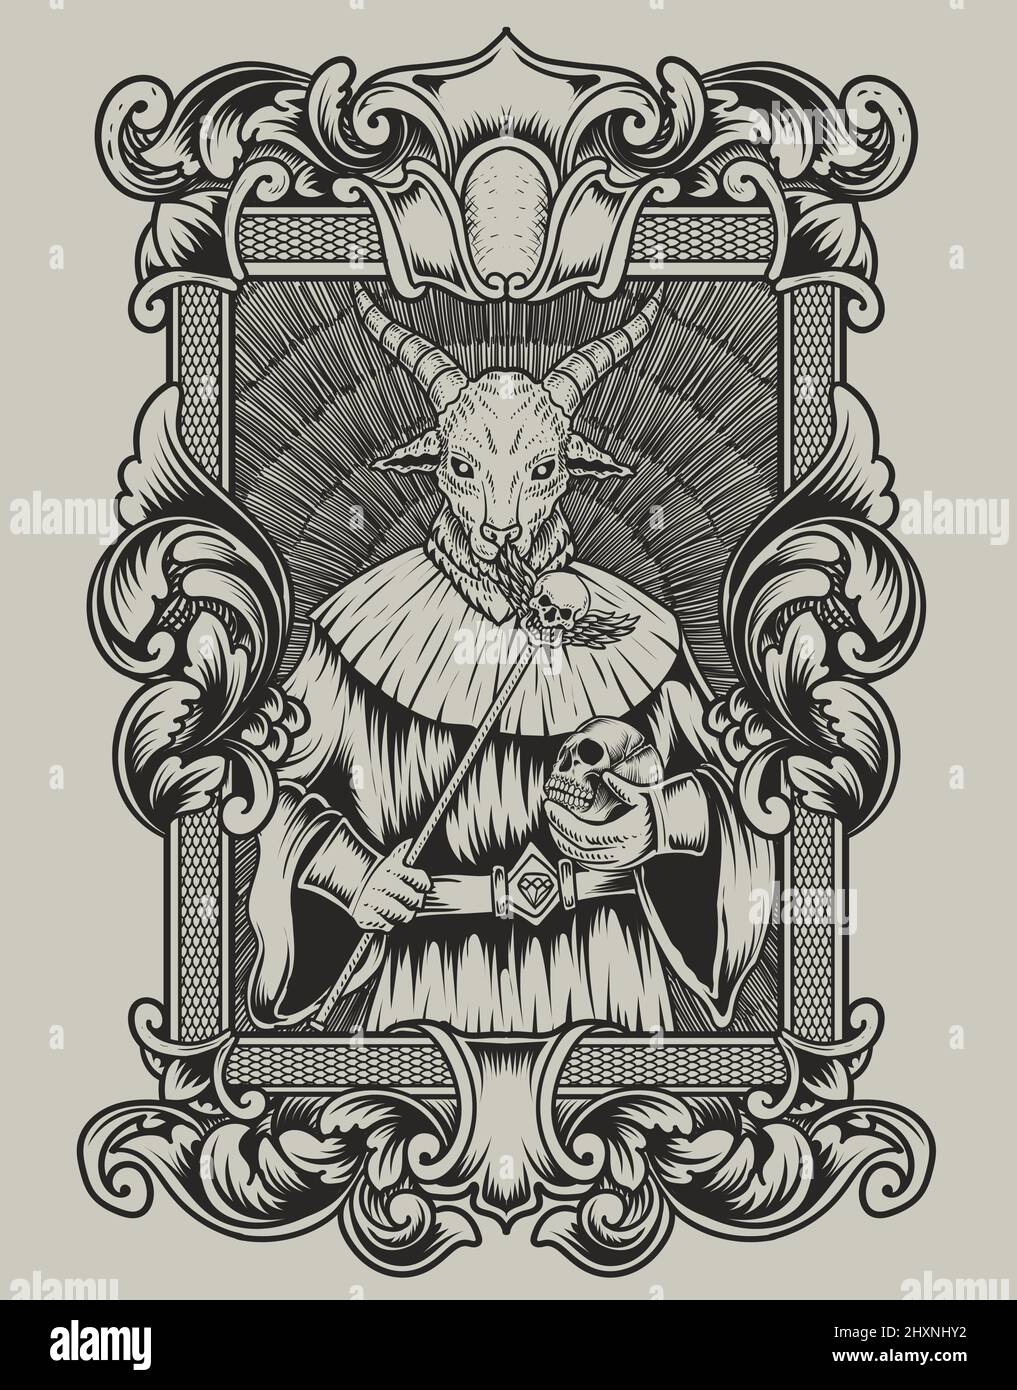 illustration scary baphomet on engraving ornament frame Stock Vector ...